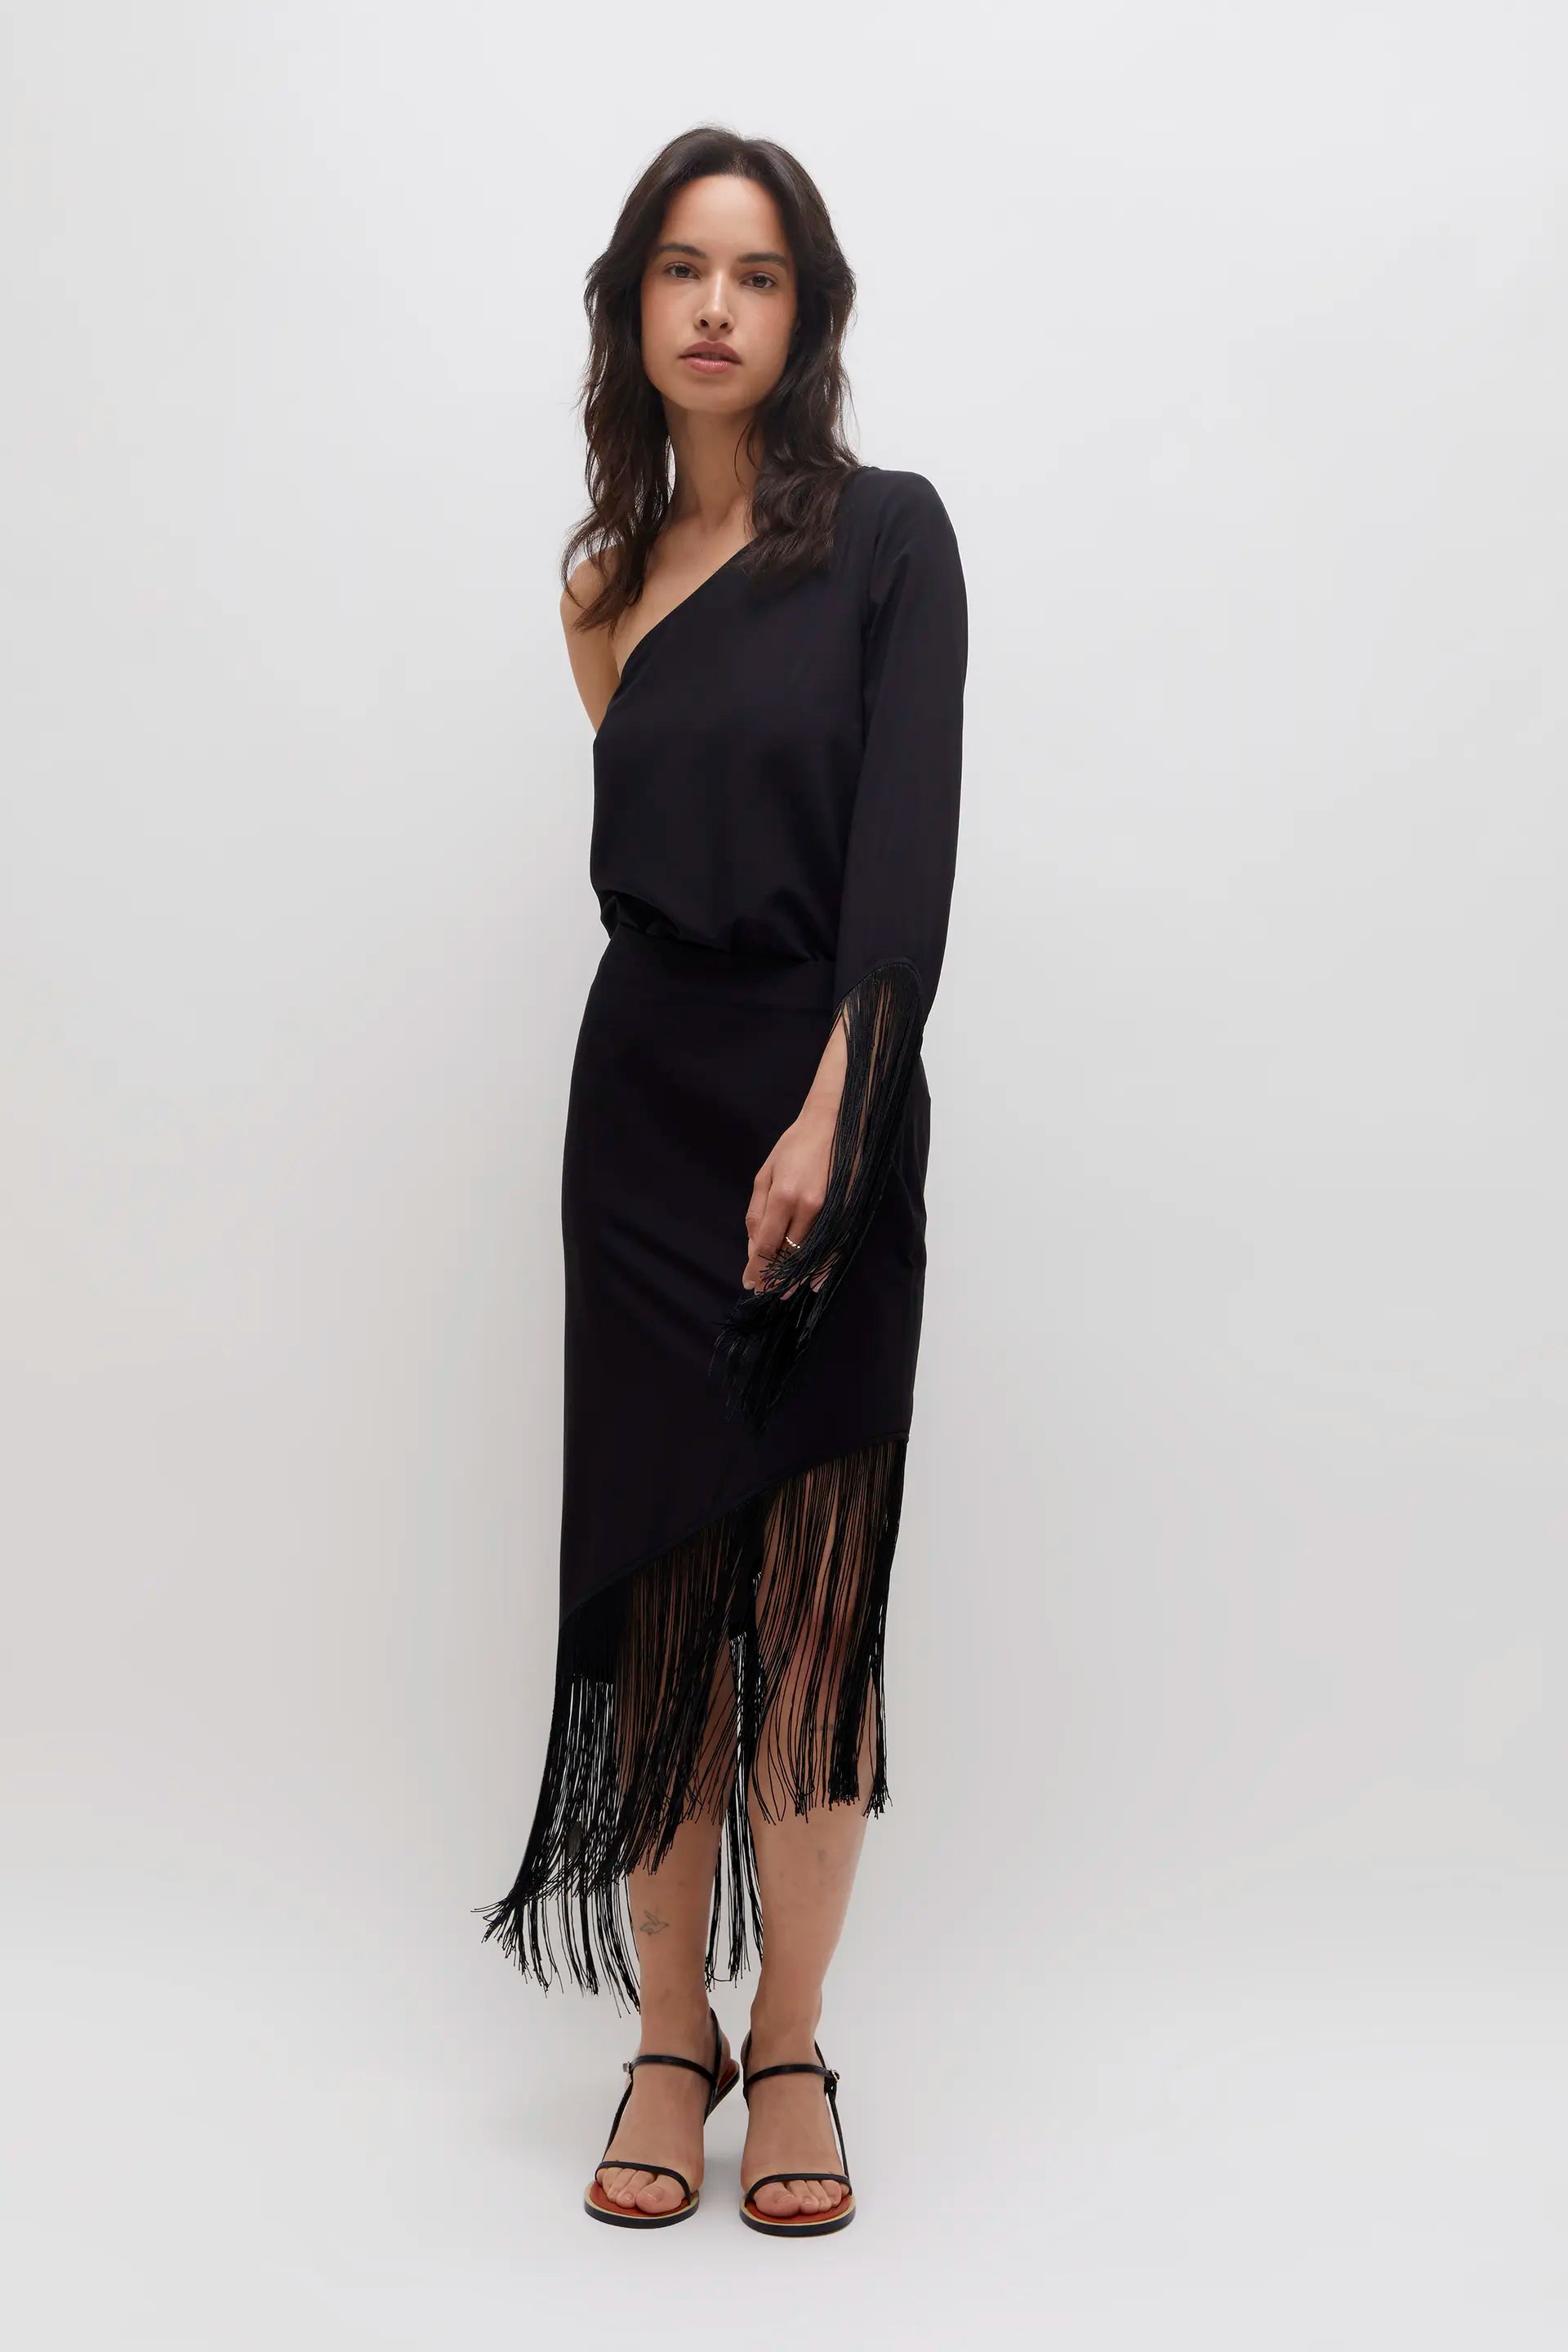 Wild Pony Asymmetrical top with black fringes - clever alice